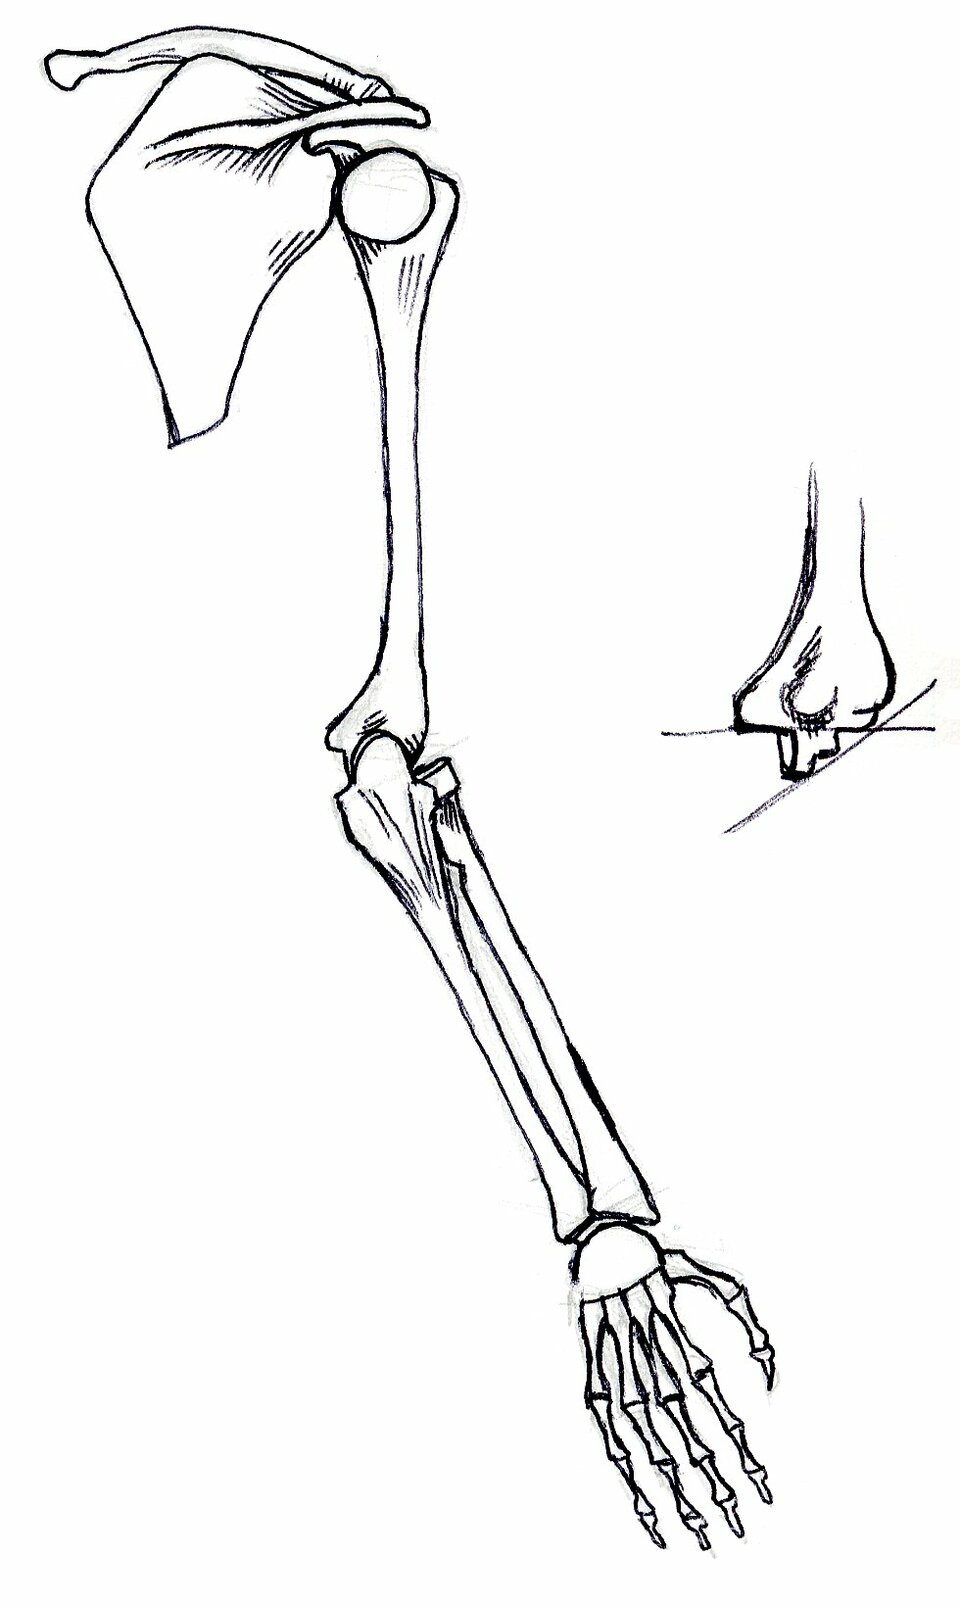 back view of bones of right arm, supinated